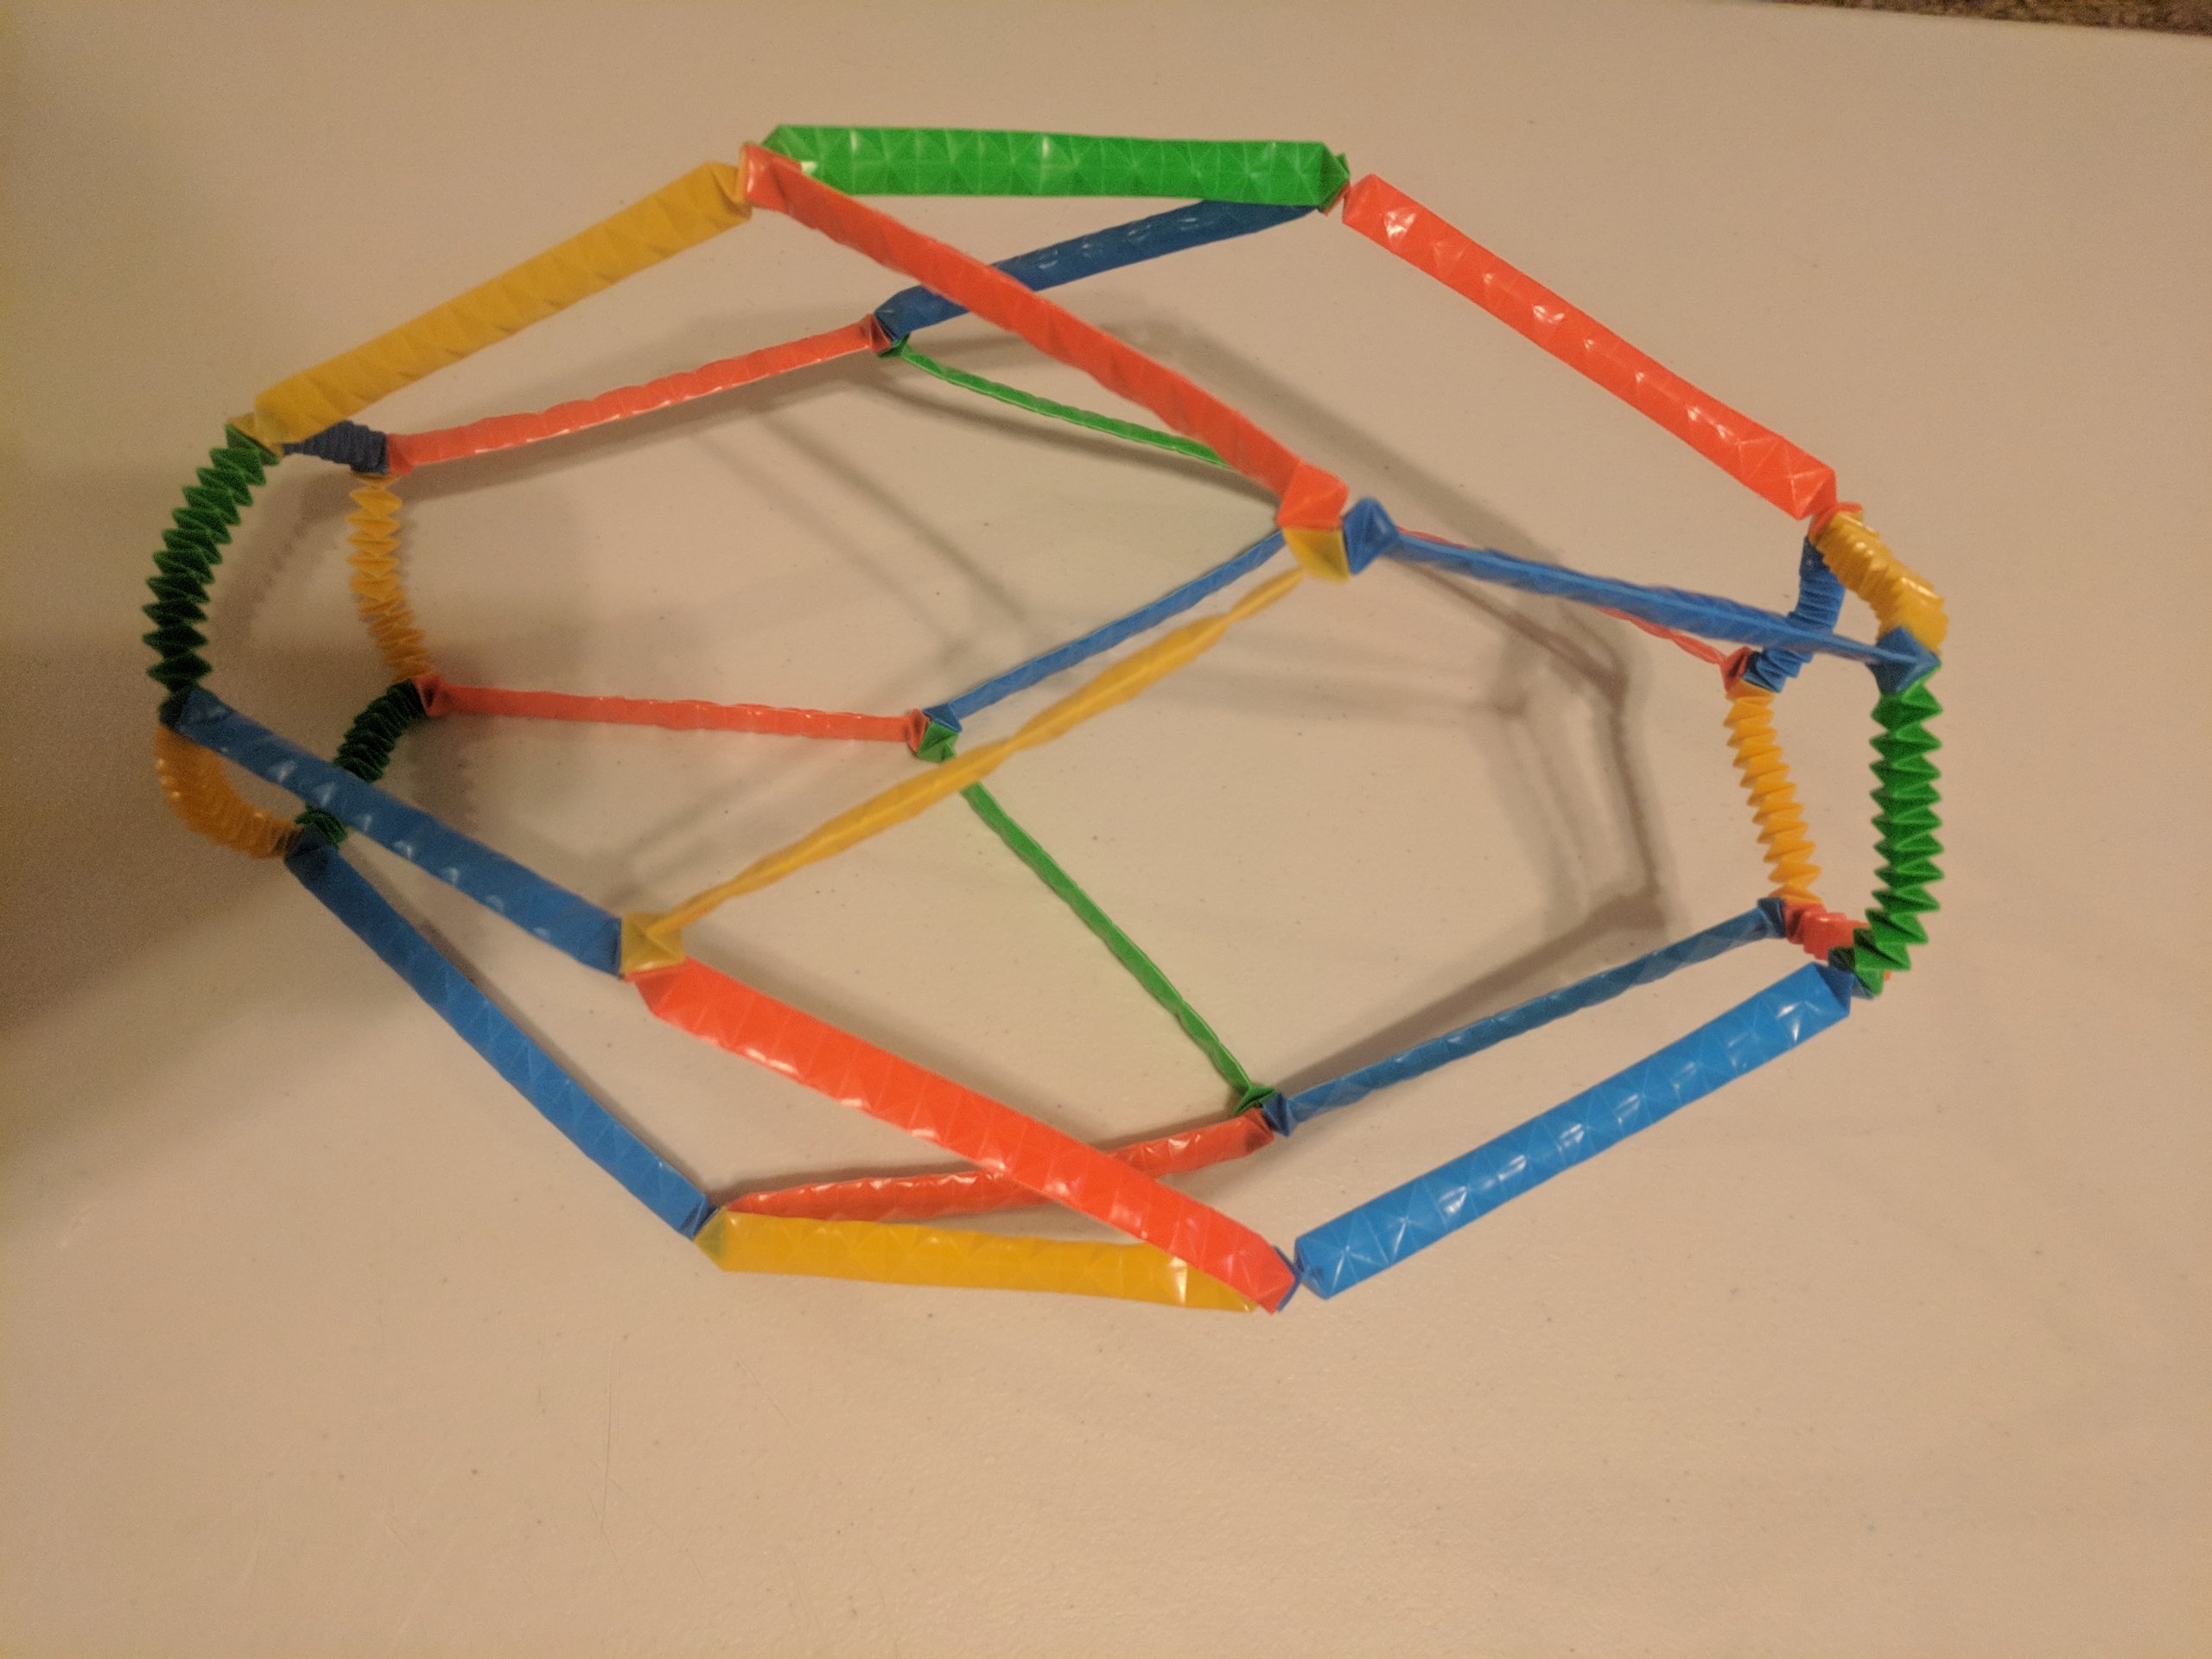 Straw Dodecahedron, Middle Edges Extended